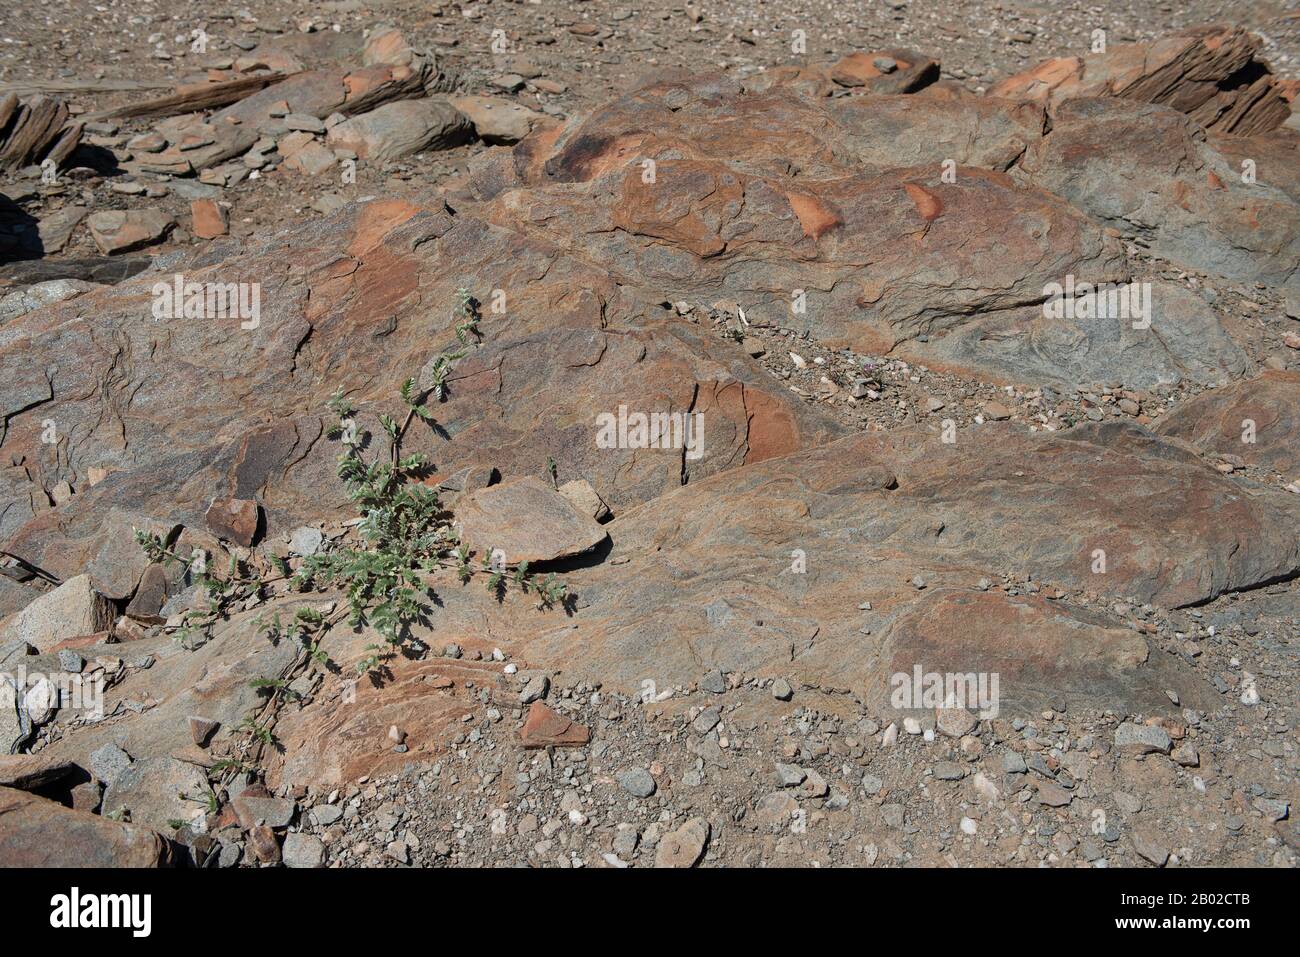 rocks and stones in Namibia Stock Photo